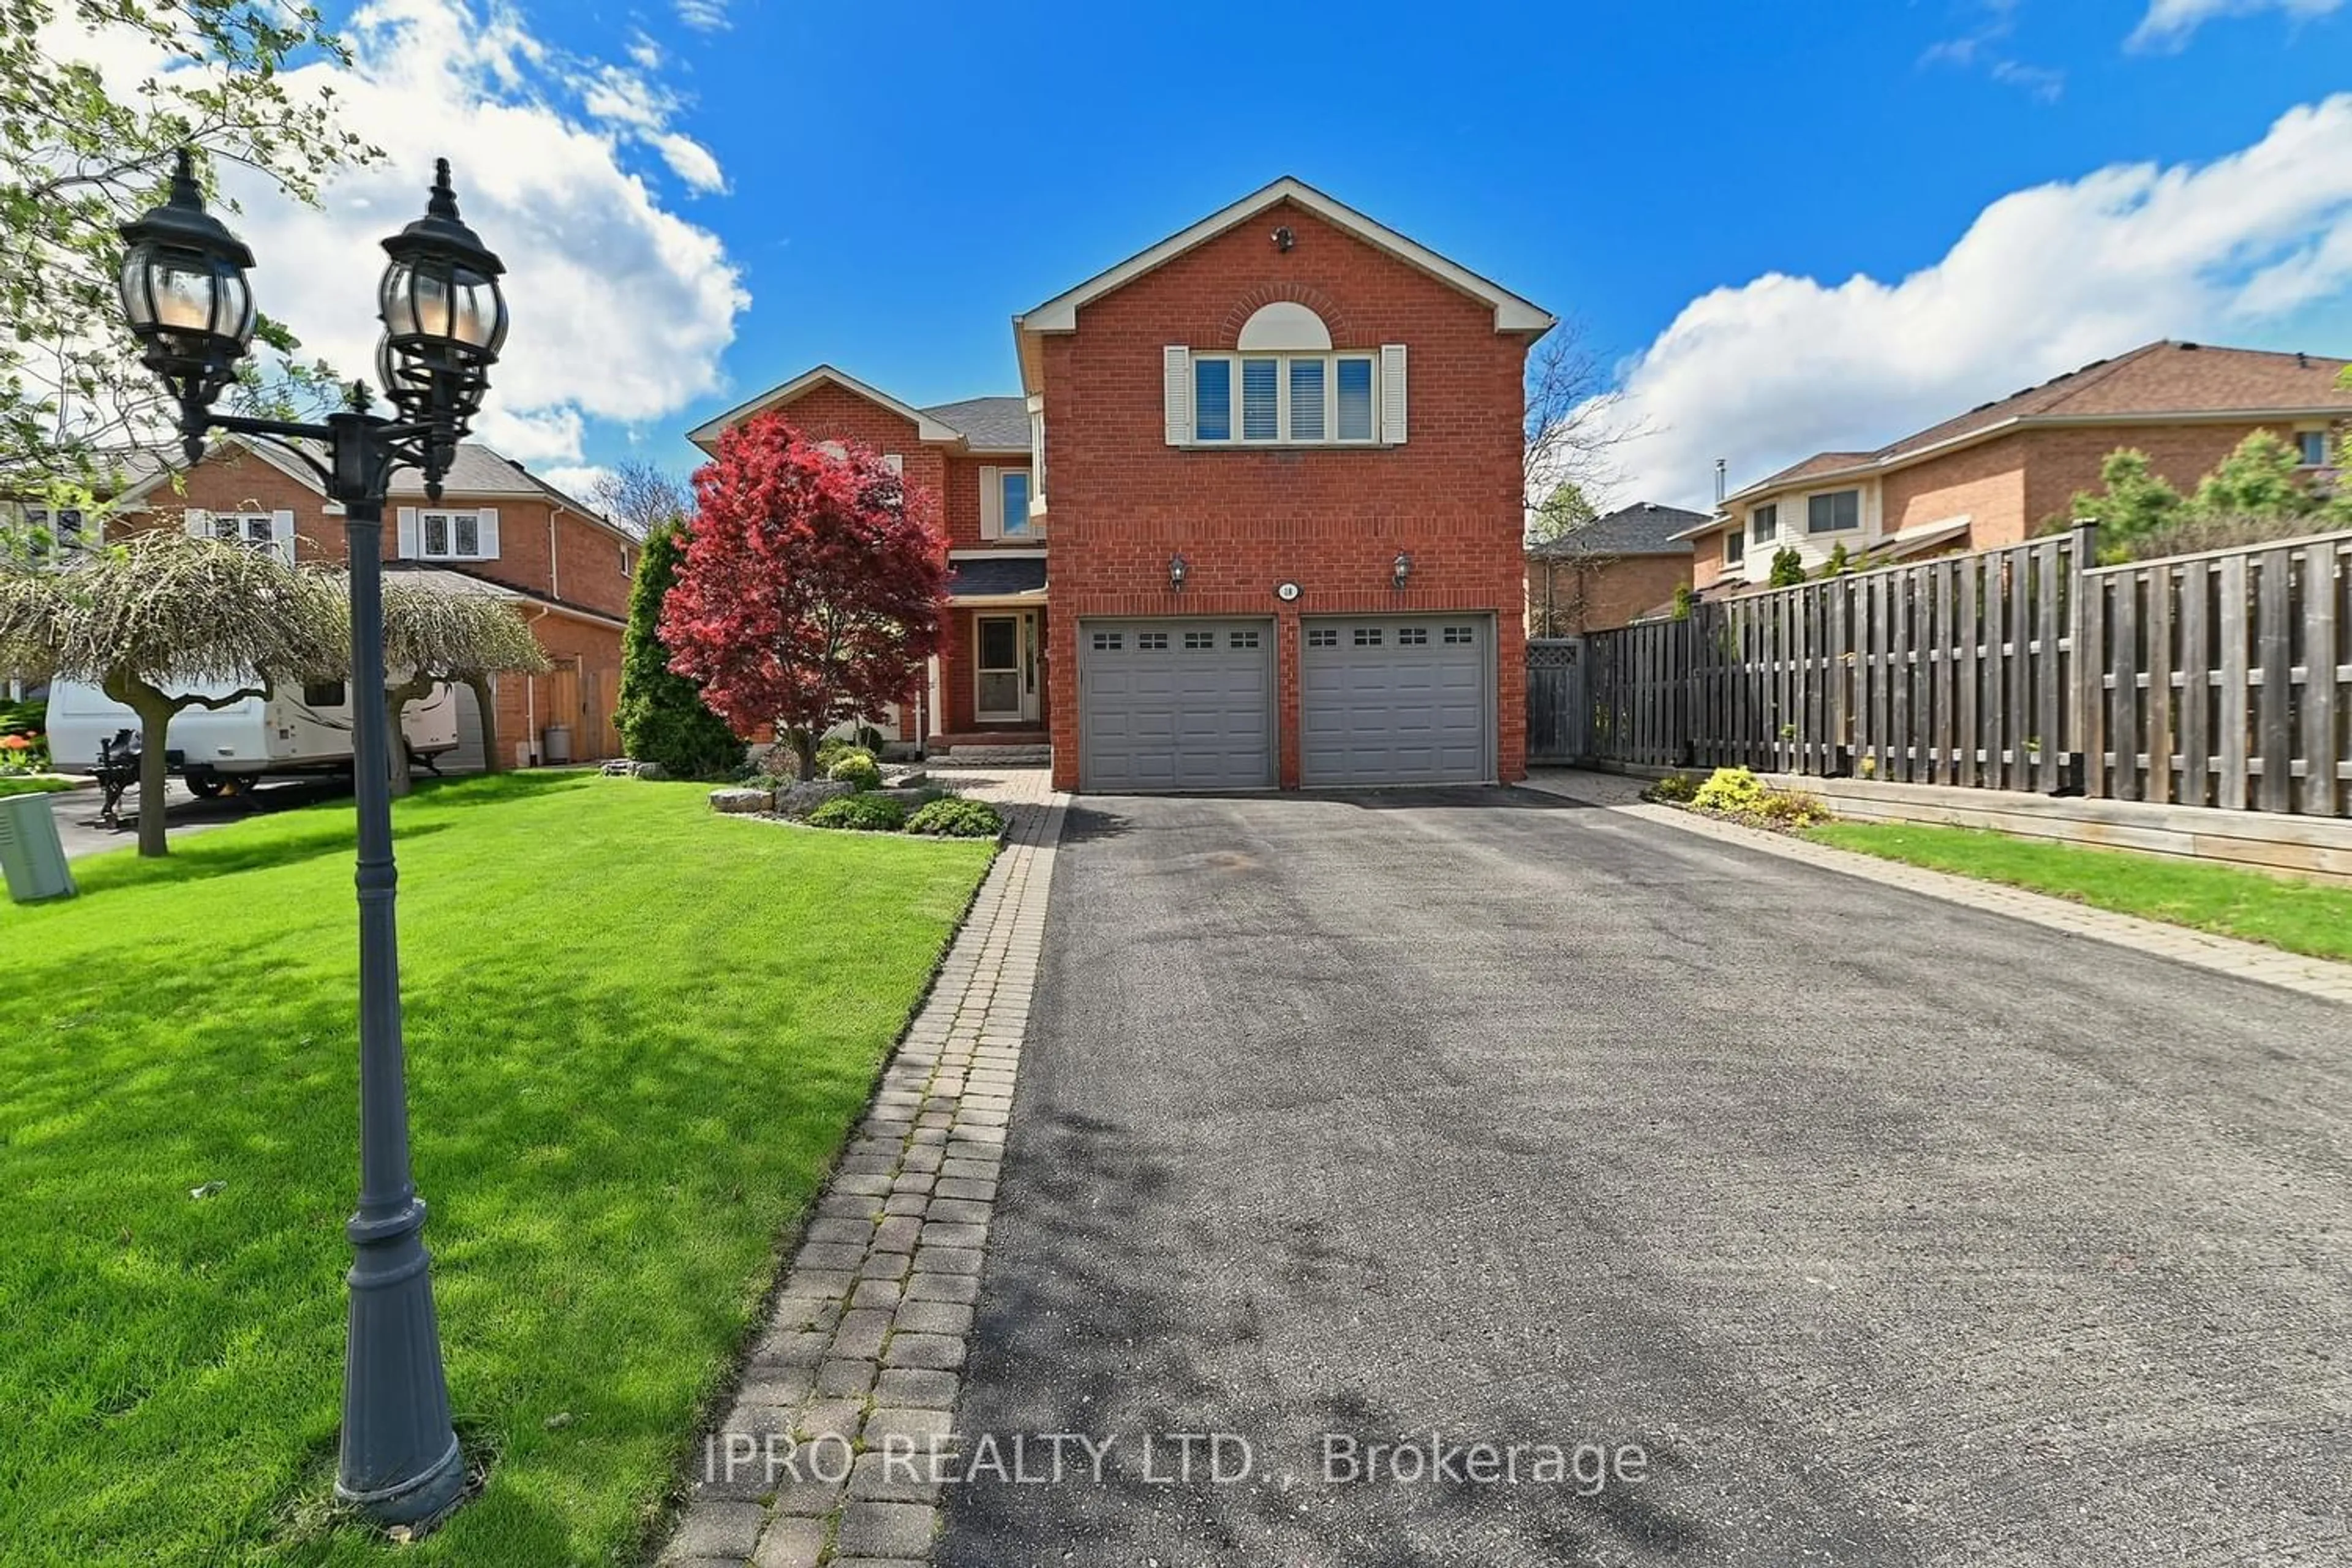 Frontside or backside of a home for 18 Burrows Crt, Brampton Ontario L6X 3H4